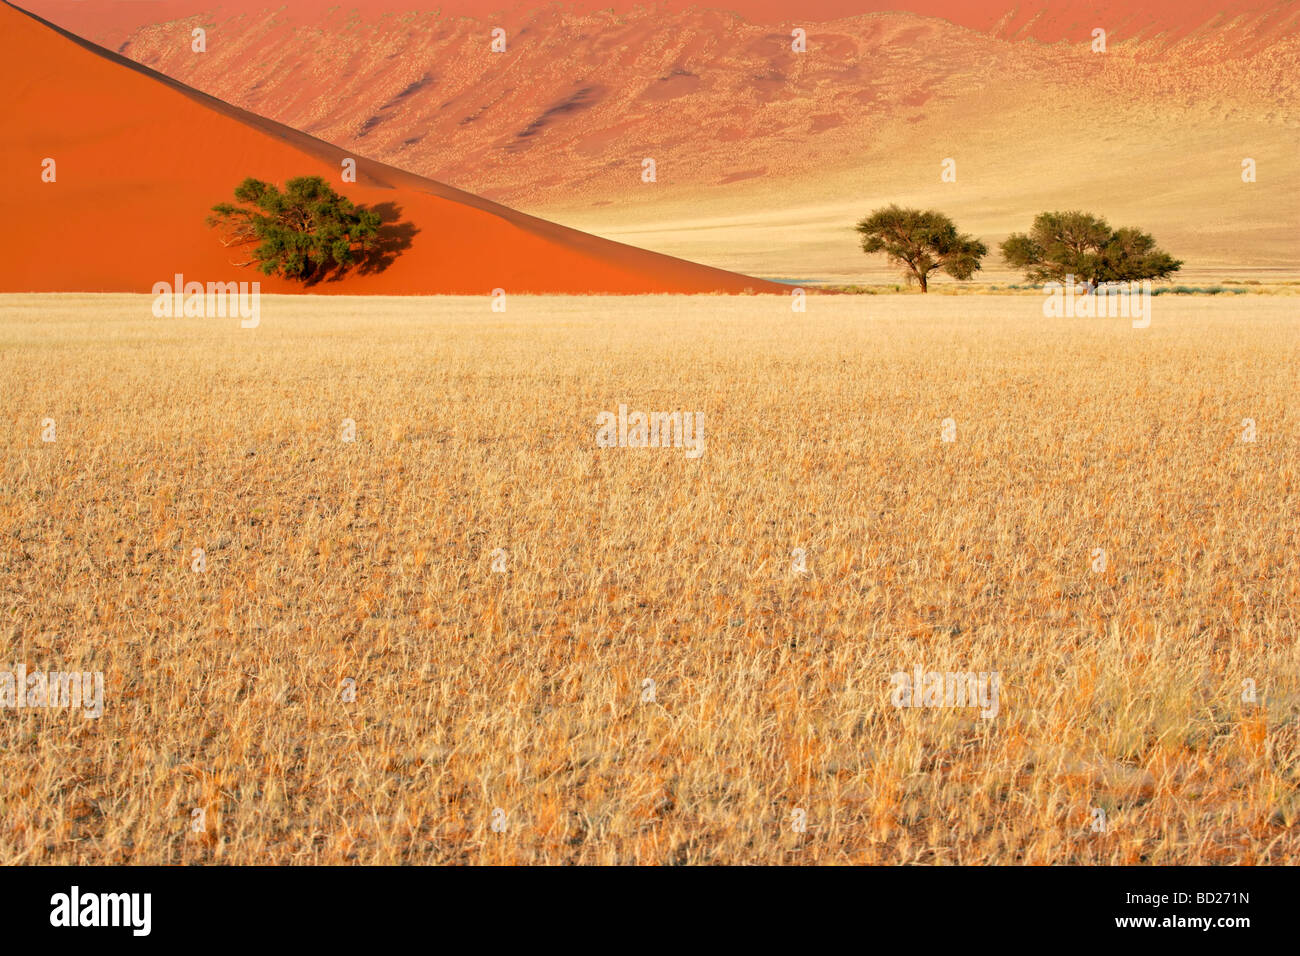 Landscape with desert grasses, red sand dune and African Acacia trees, Sossusvlei, Namibia, southern Africa Stock Photo